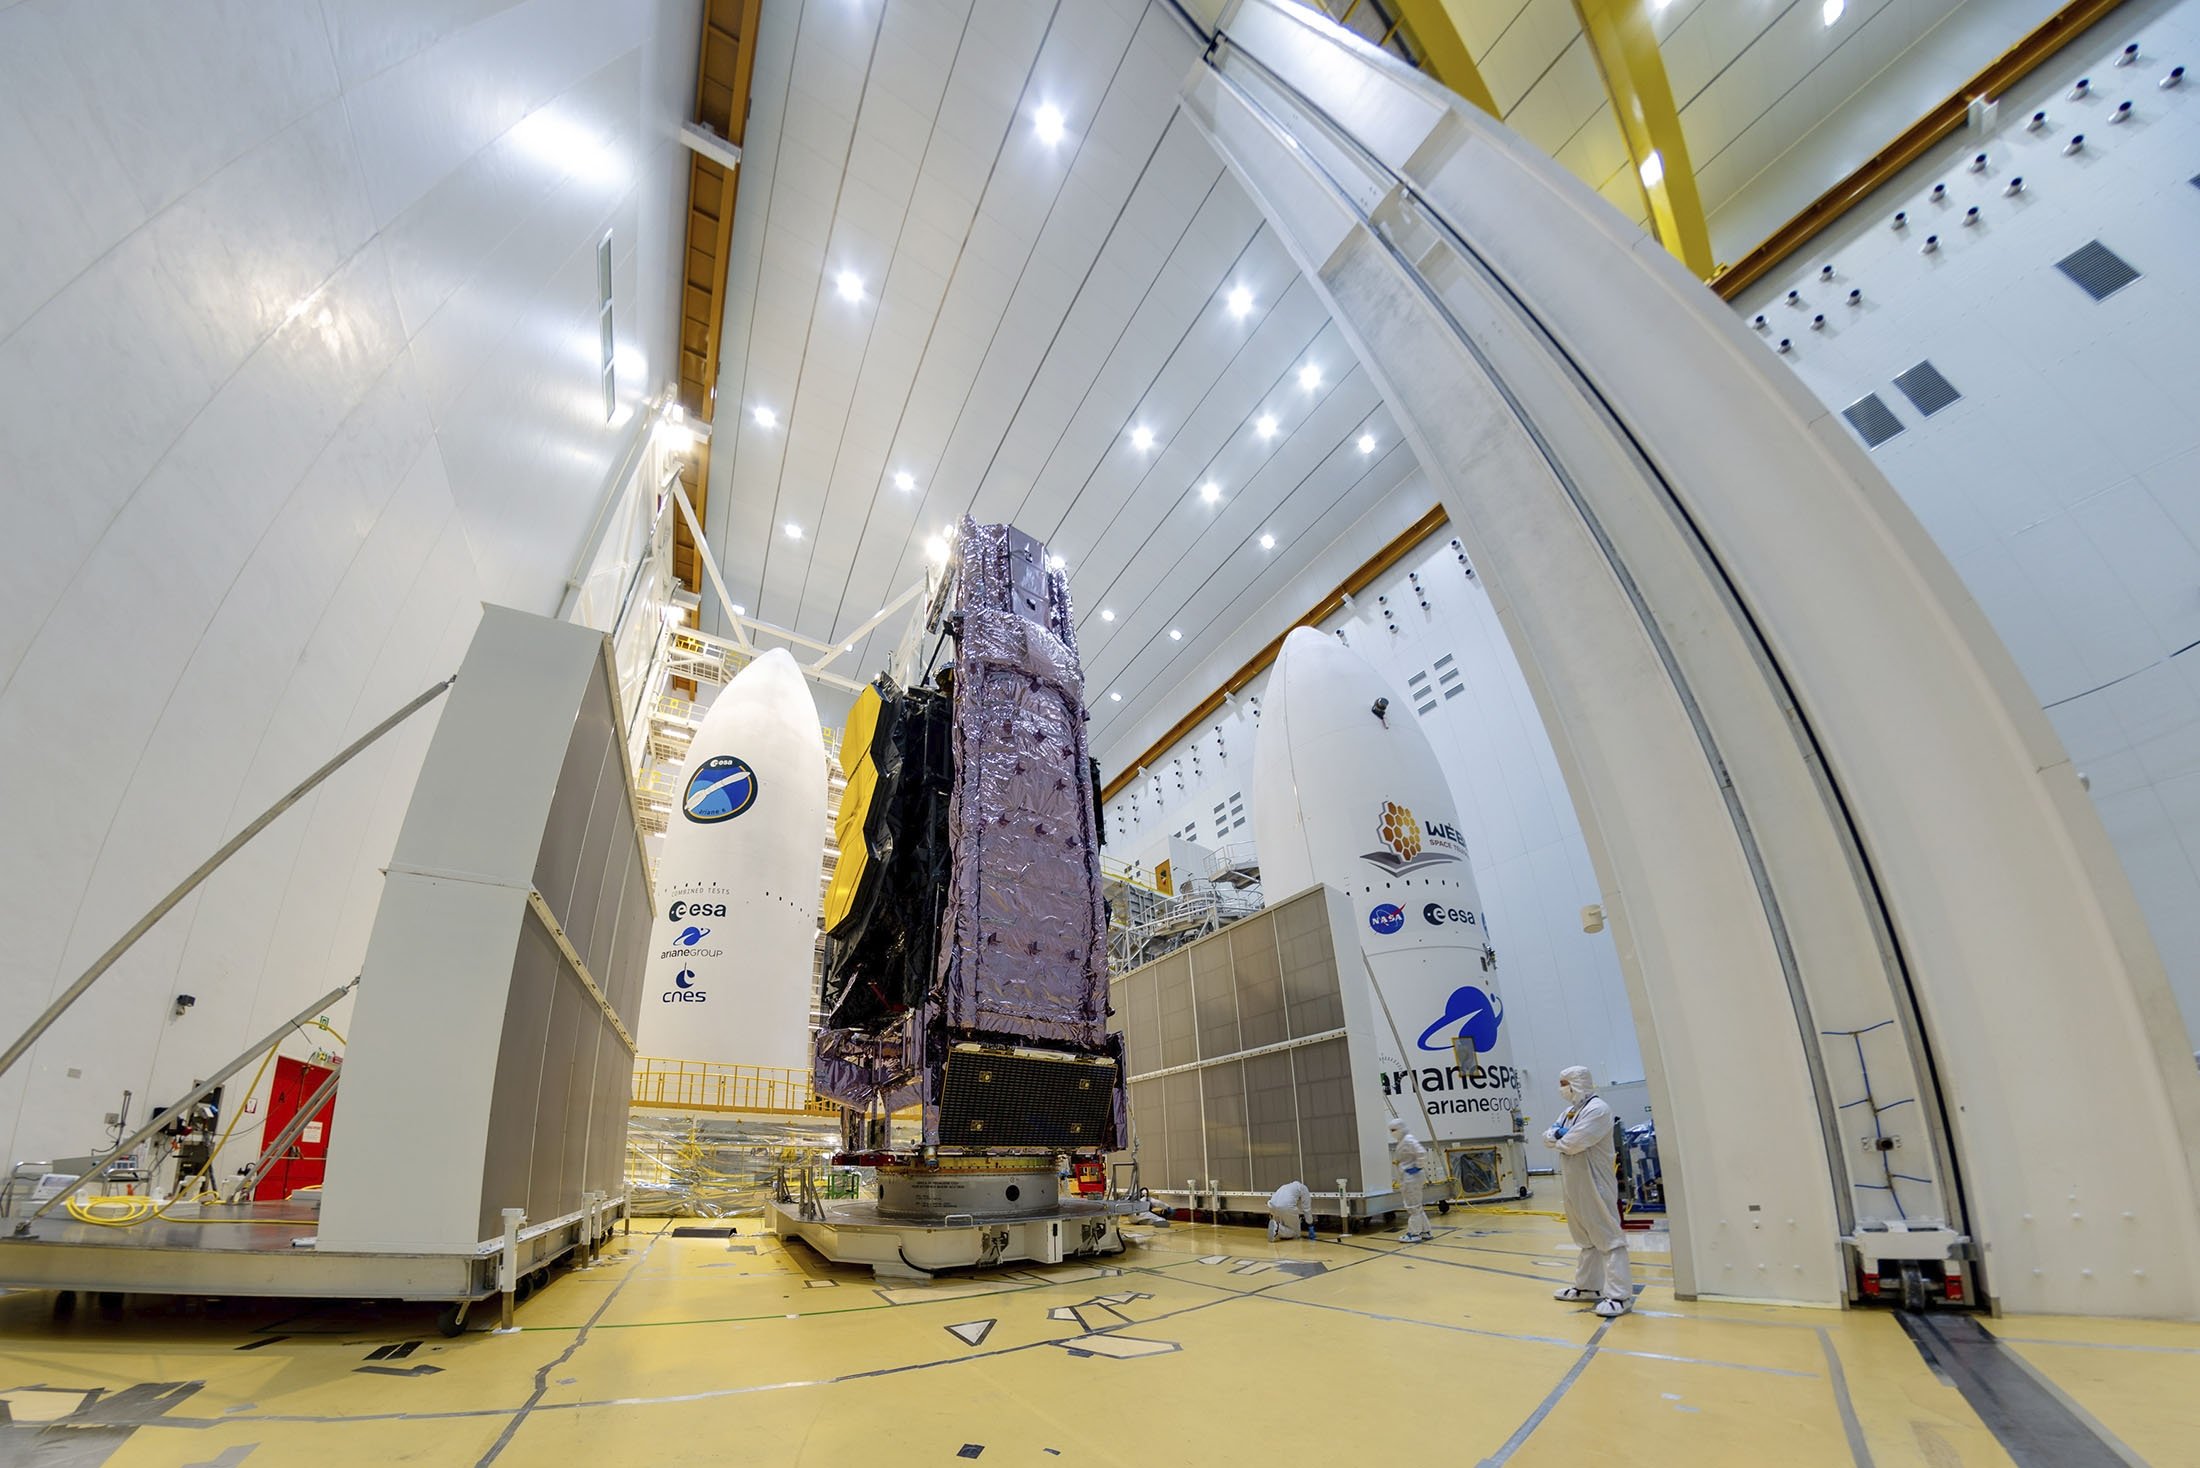 The NASA James Webb Space Telescope is mounted on top of the Ariane 5 rocket that will launch it from Europe's Spaceport in French Guiana, Dec. 11, 2021. (ESA via AP)